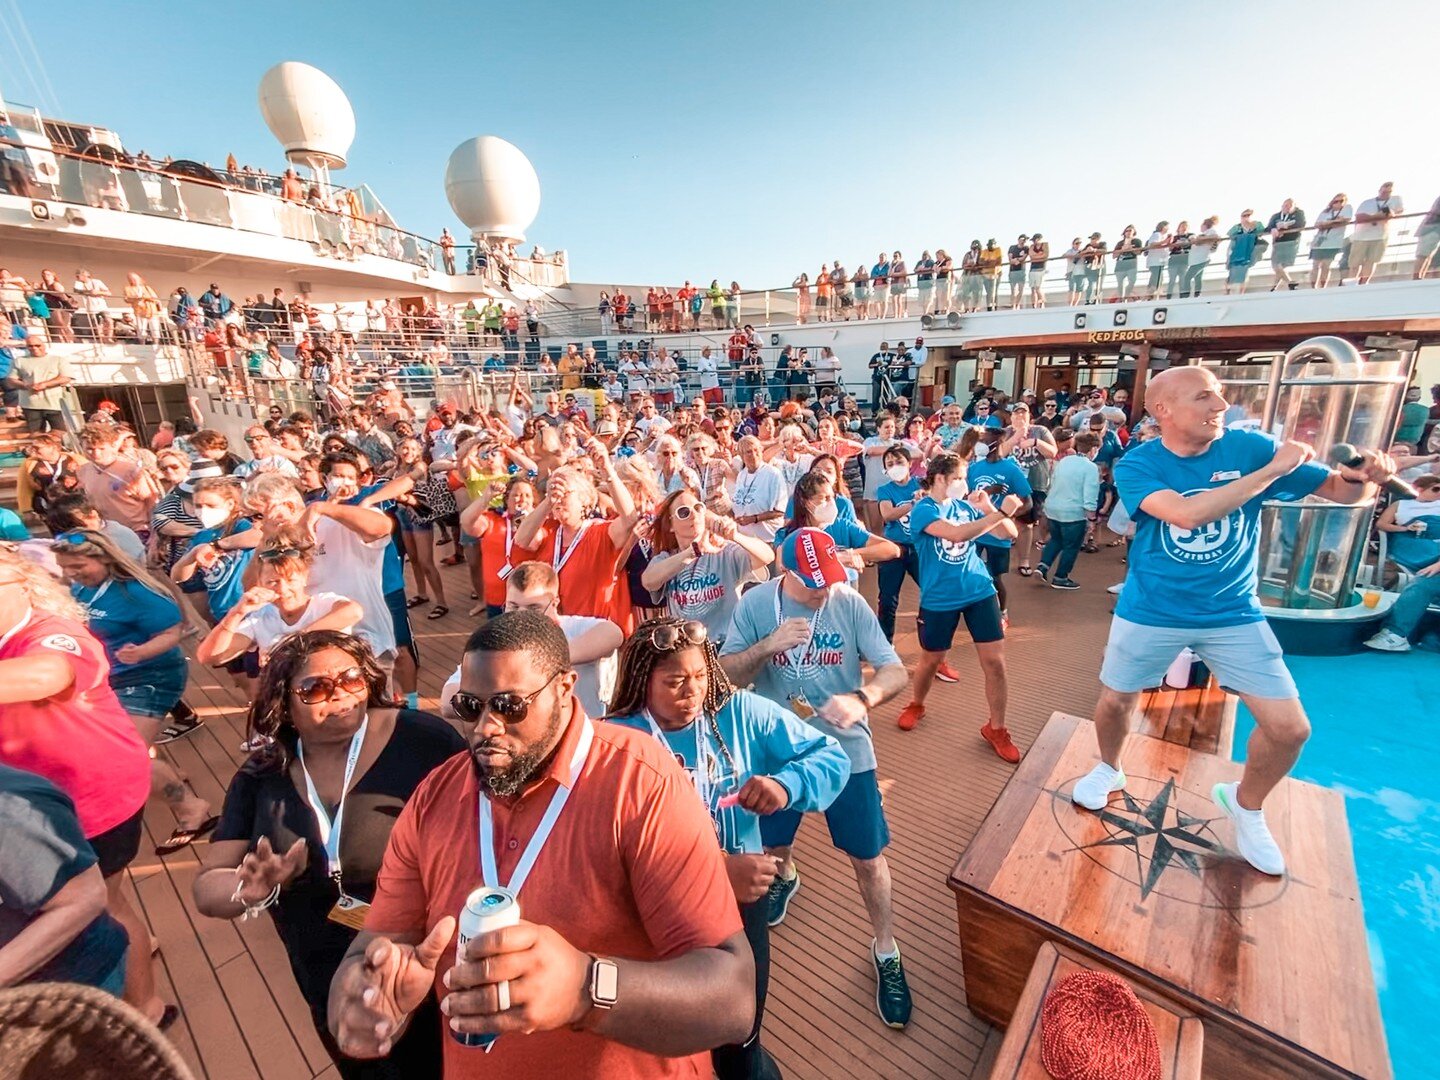 Kicking off Carnival's 50th Birthday in style with our Sail Away Party here on the Sunshine 💥🔥🎉
#CarnivalTurns50 #CarnivalEntertainment #CarnivalSunshine #JakeItEasy
📸: @tylerfromtheship